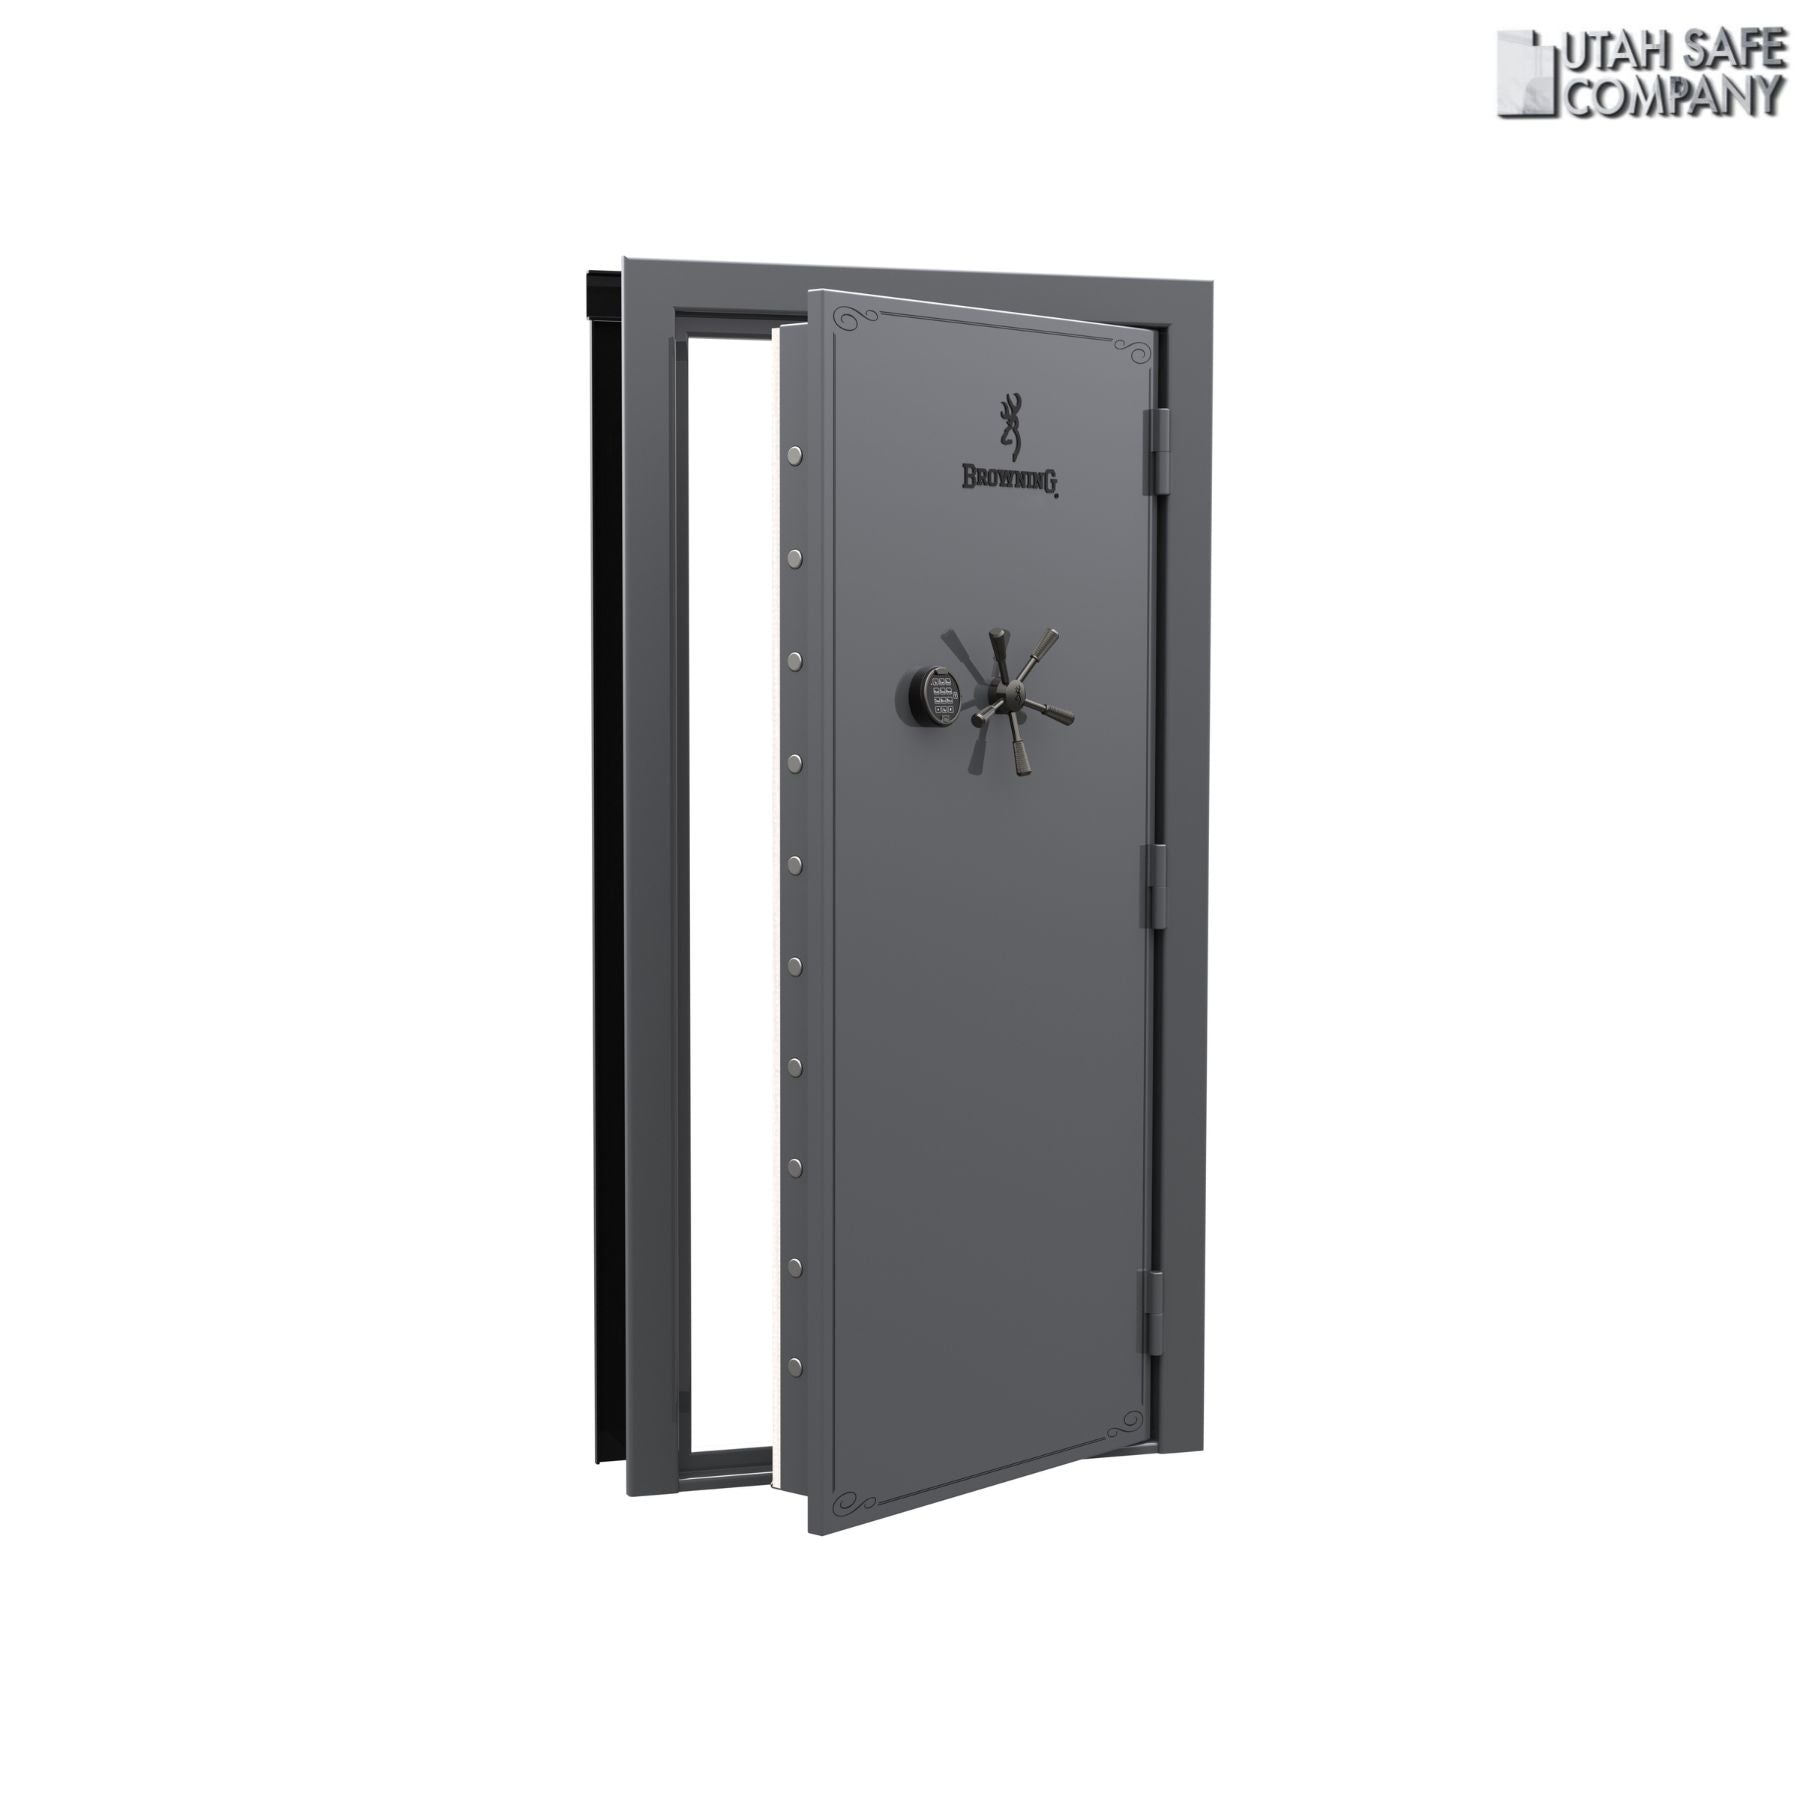 Browning Clamshell Out-Swing Vault Door - Utah Safe Company